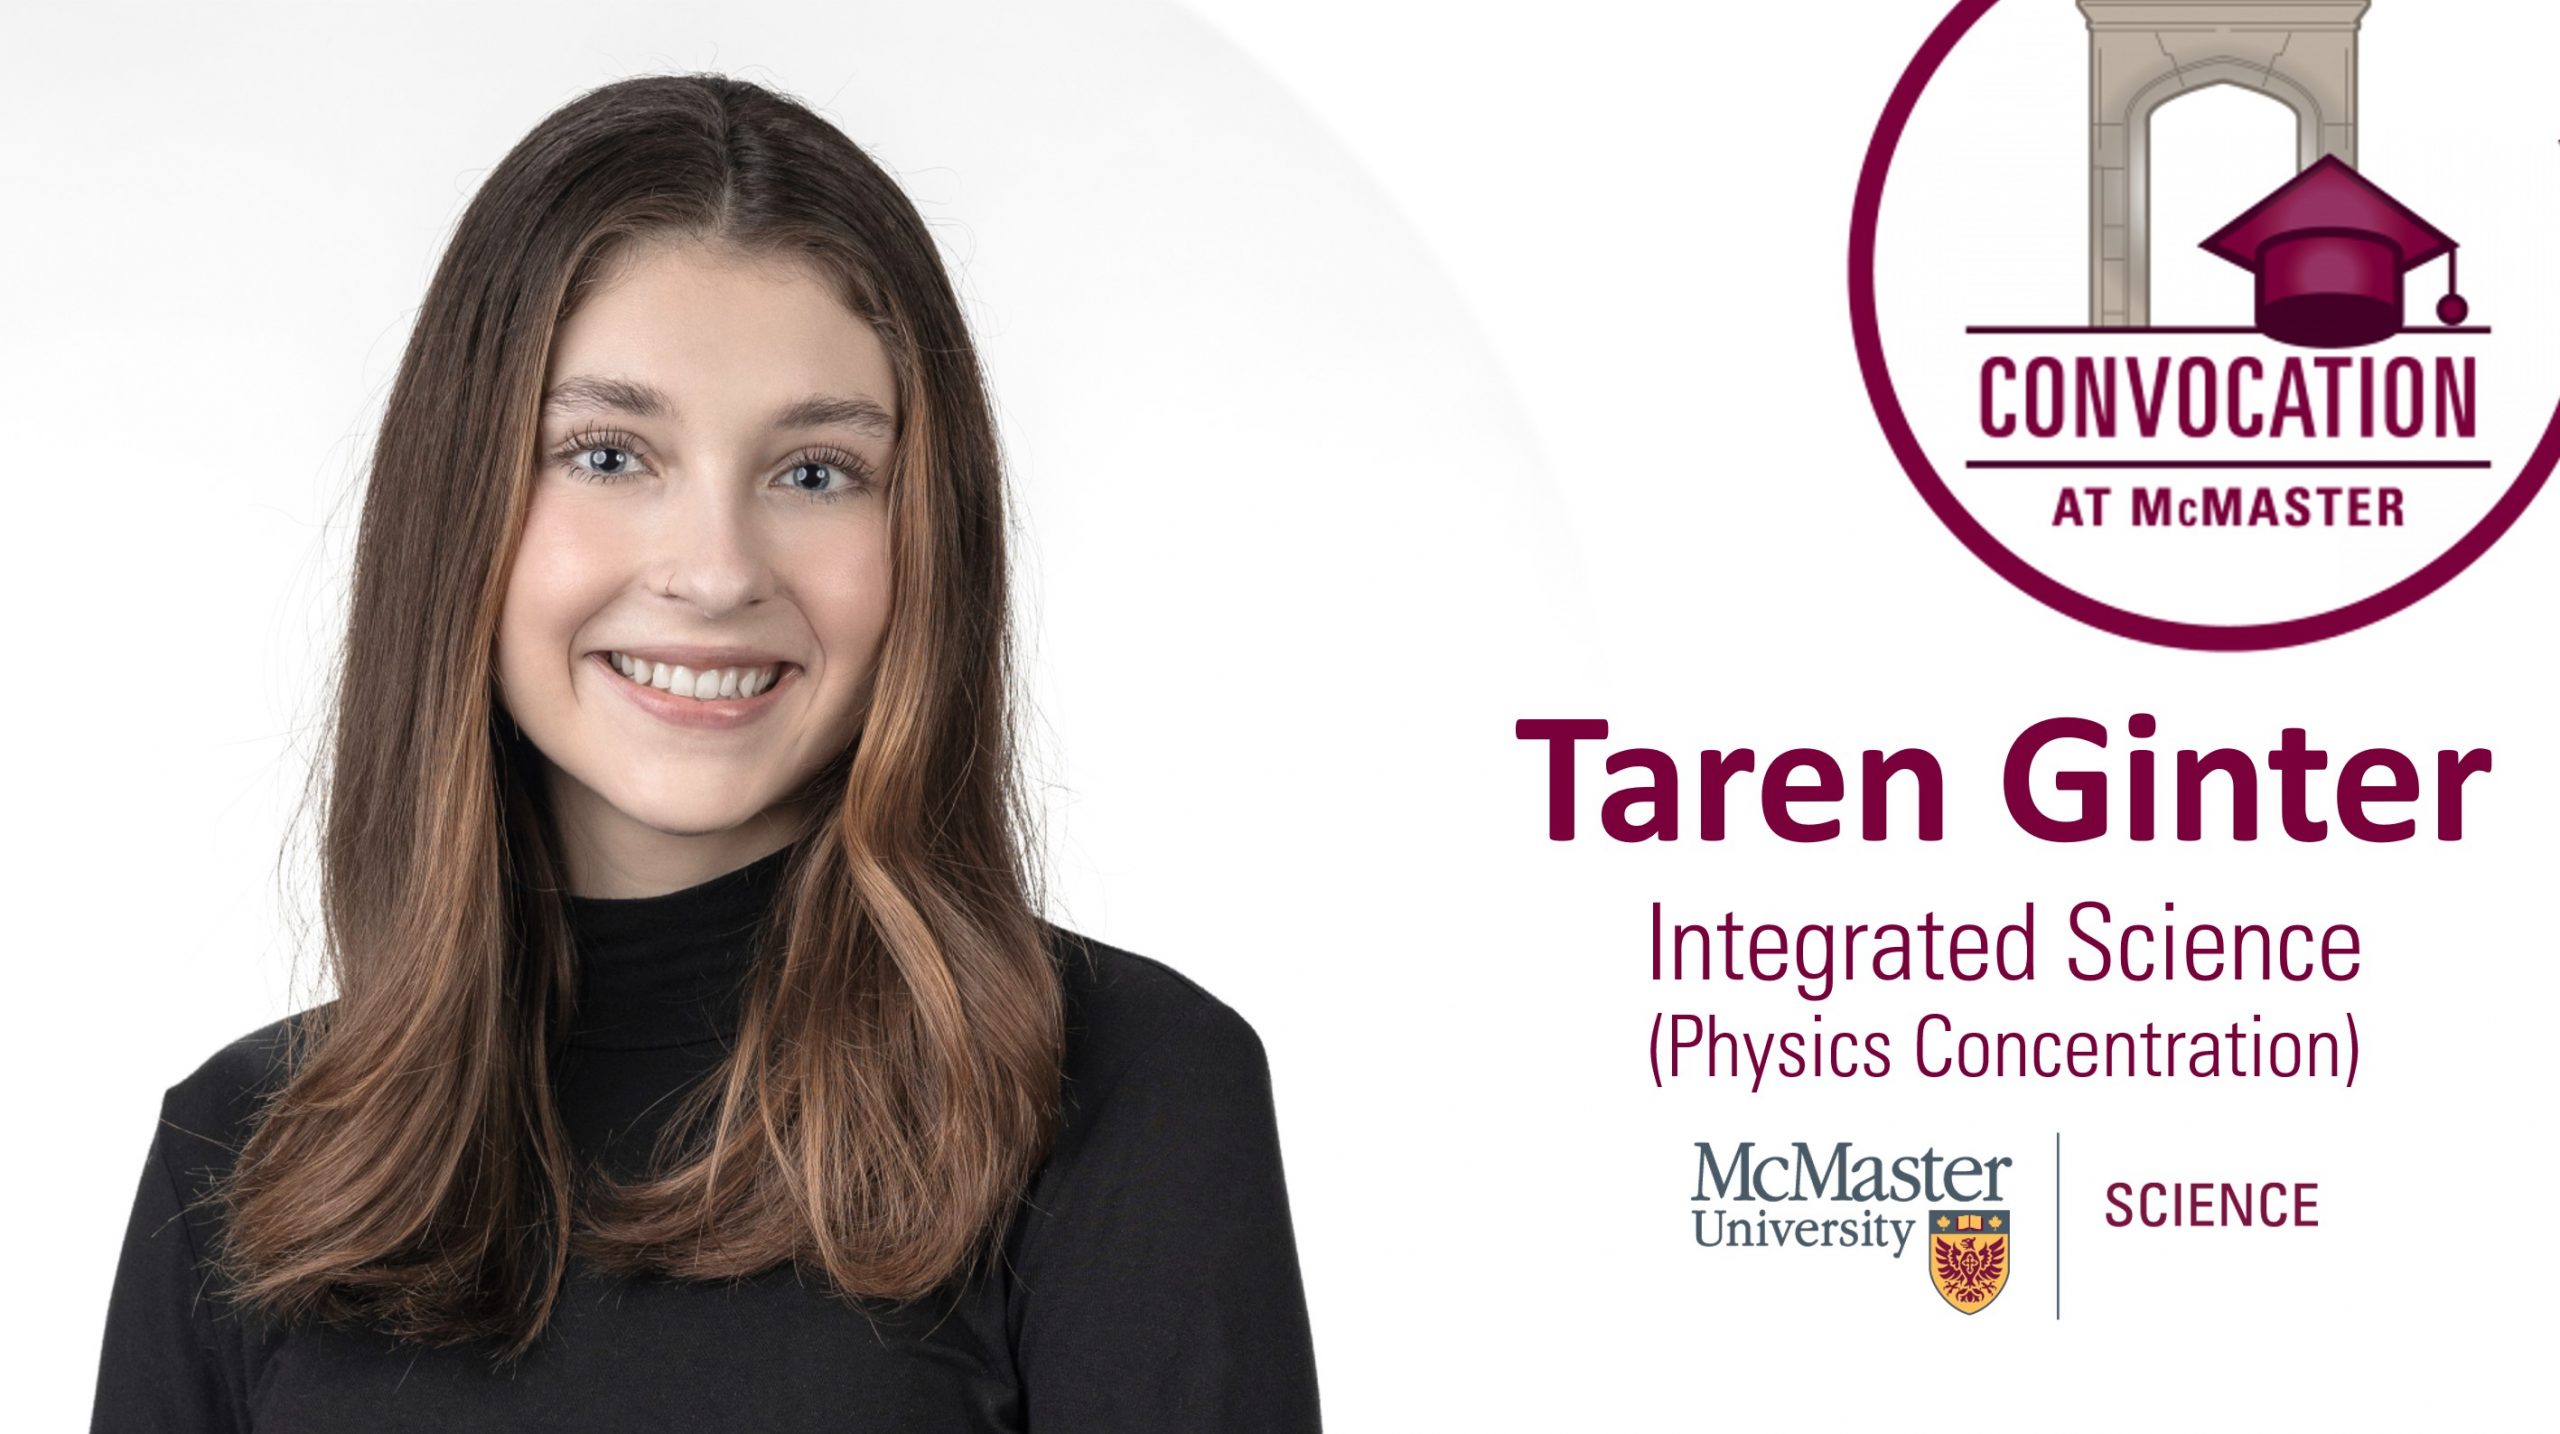 Portrait of Taren Ginter with the convocation logo and mcmaster science logo